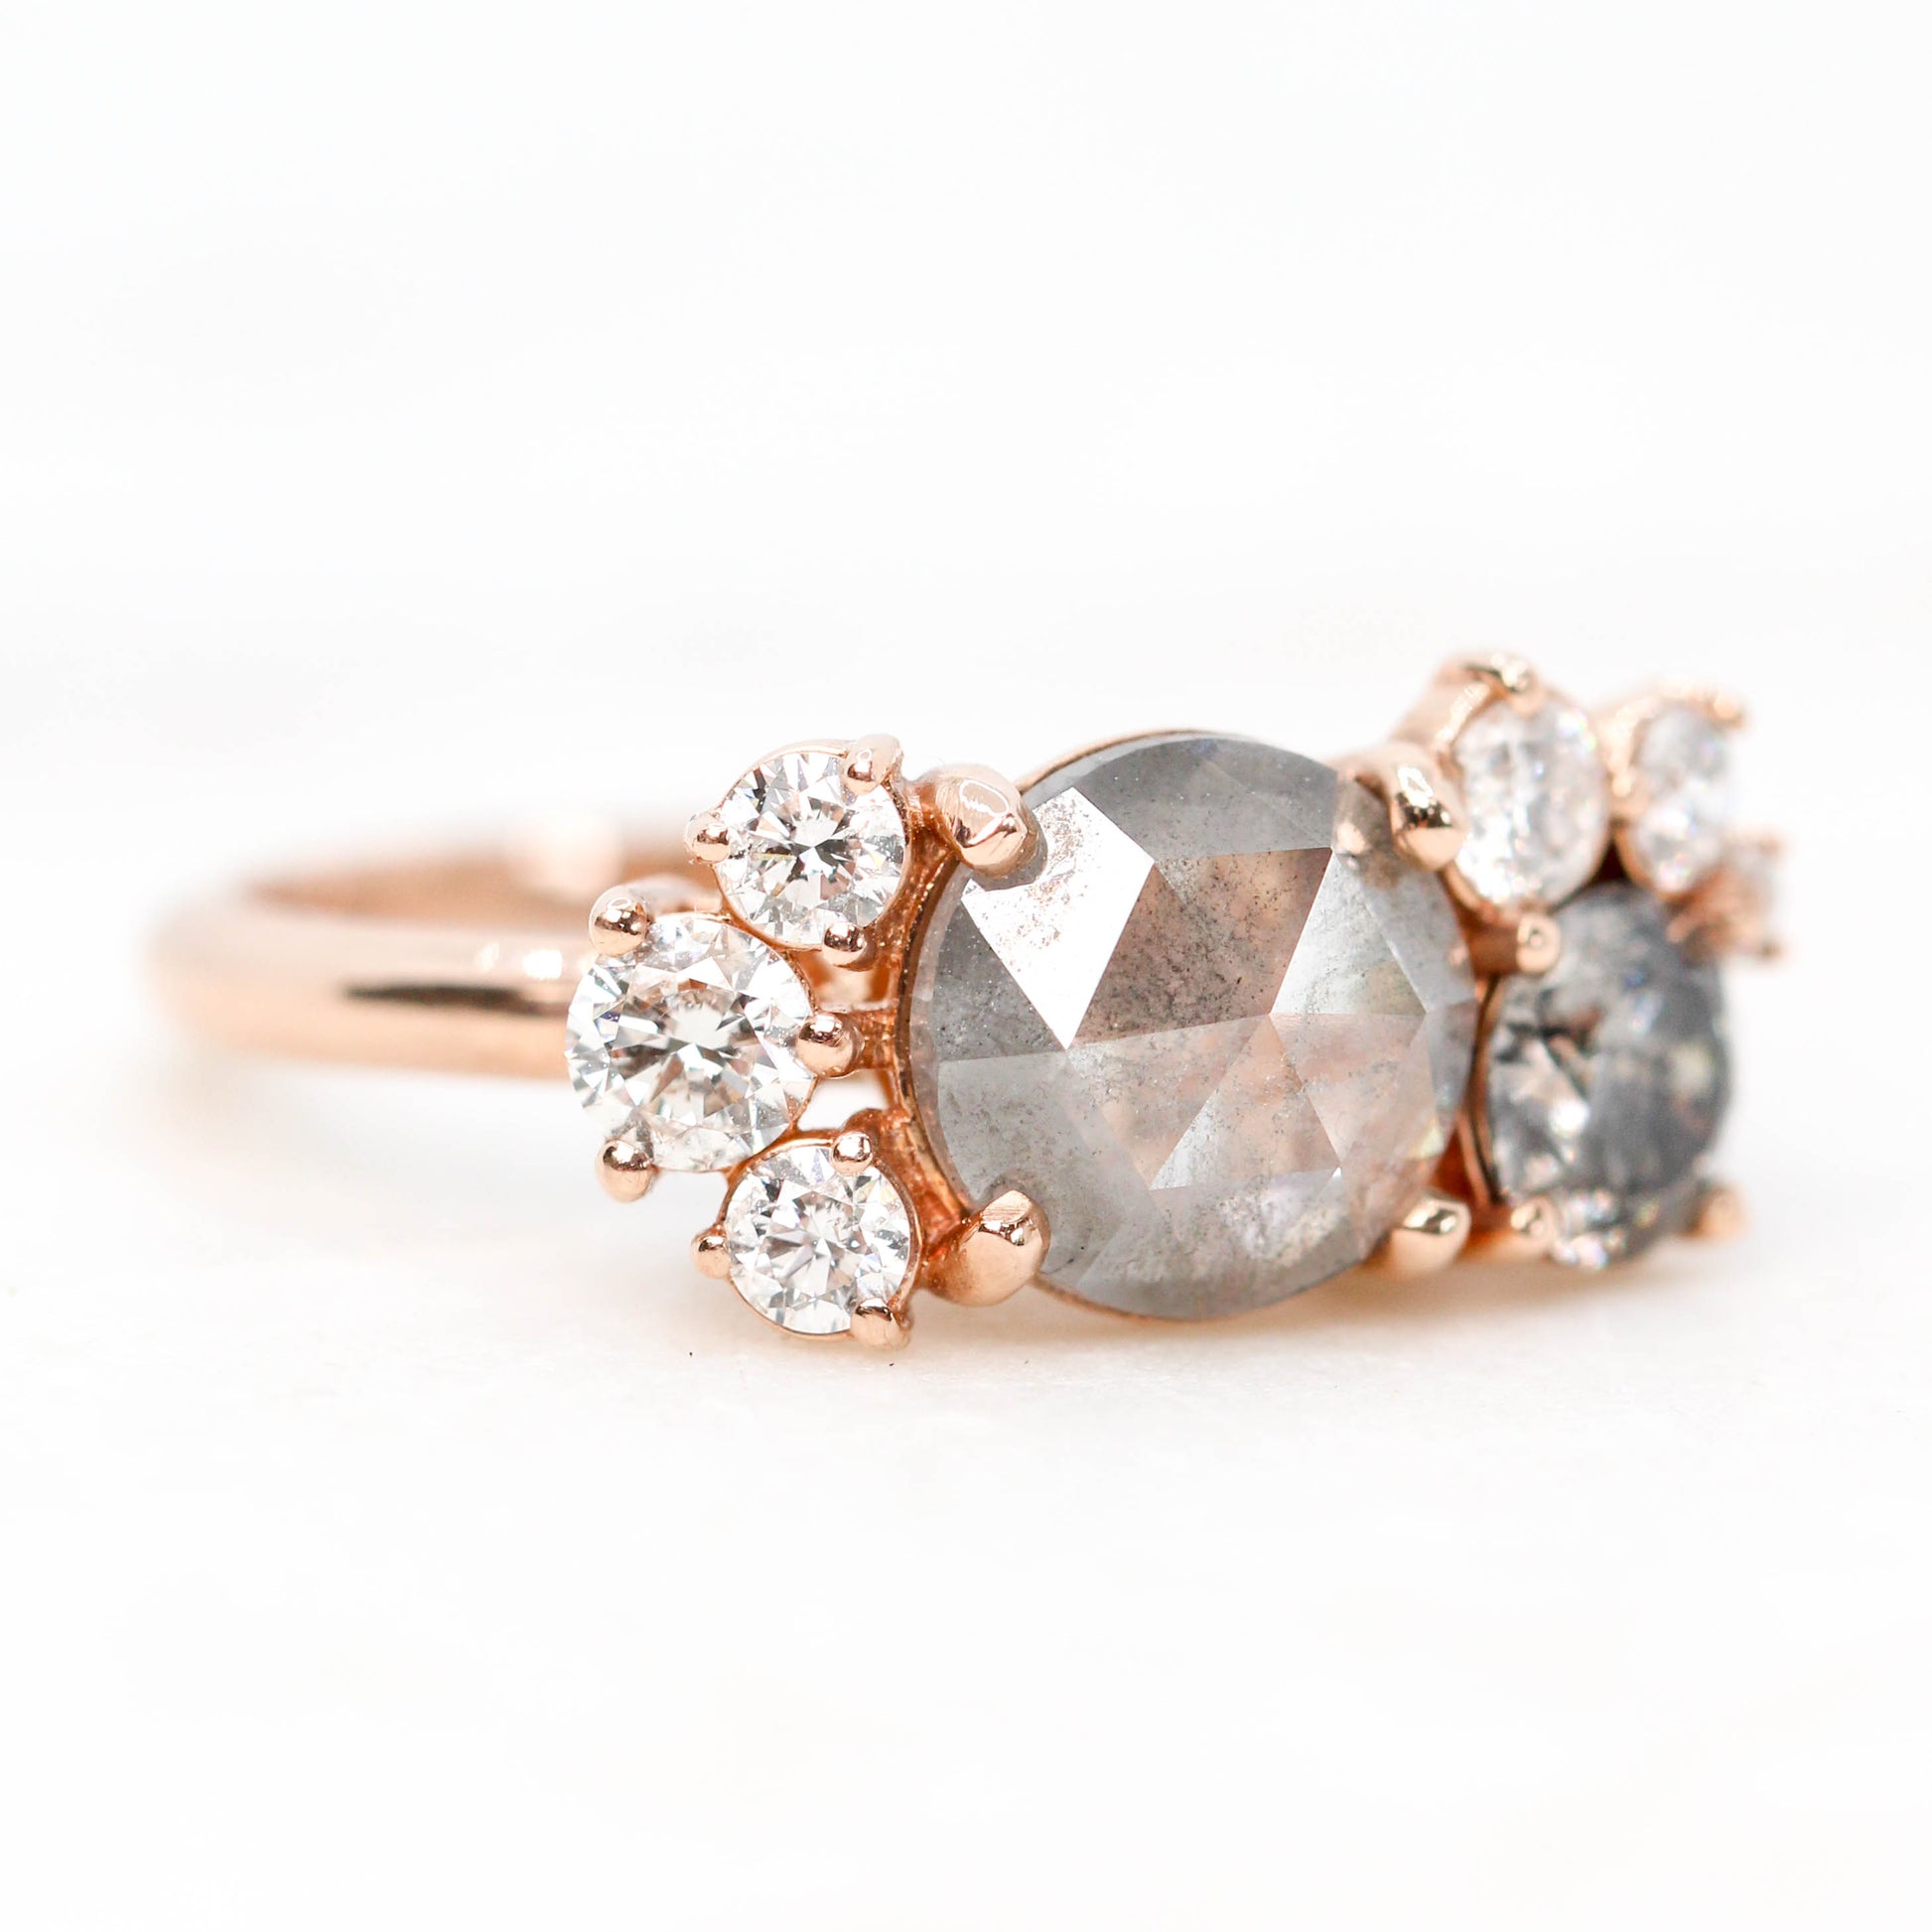 Safian cluster ring with Celestial + Clear Diamonds in 10k rose gold - ready to size and ship - Midwinter Co. Alternative Bridal Rings and Modern Fine Jewelry